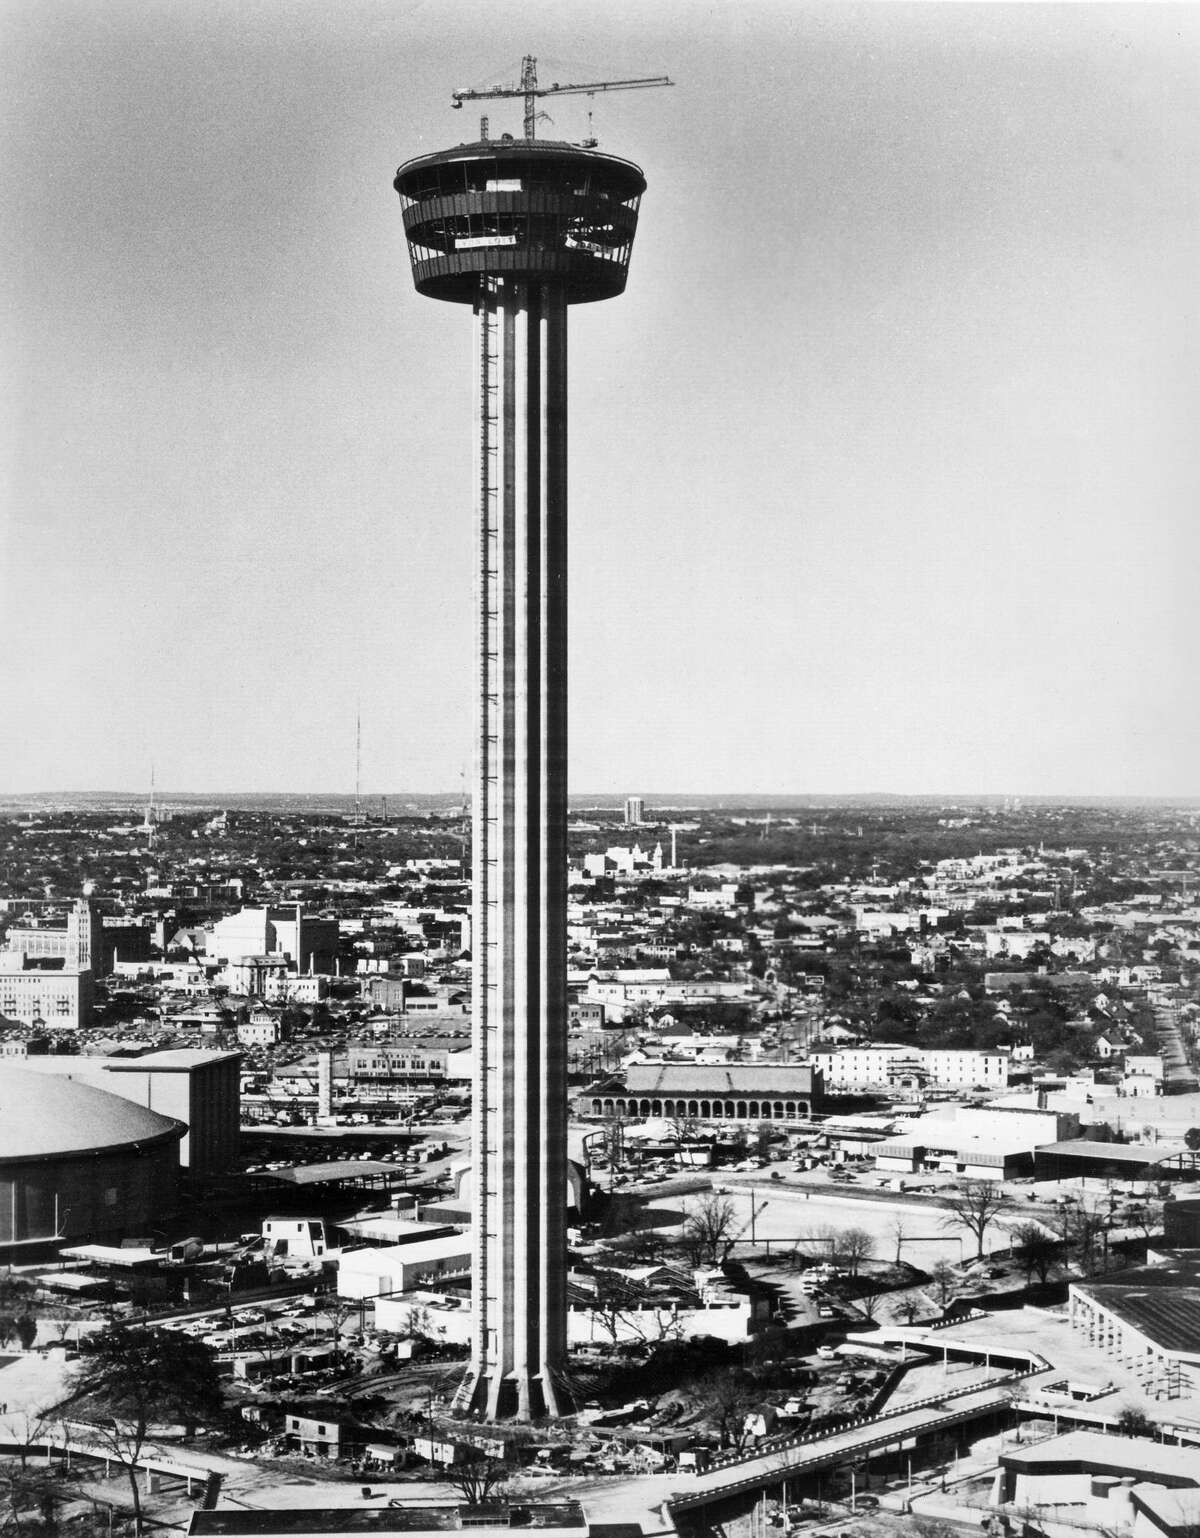 This file photo shows the Tower of the Americas as it appeared shortly after the 'tophouse' was hoisted into place at the top of its concrete shaft, in early 1968. By most accounts, construction of the tower posed the biggest challenge for developers of the World's Fair, HemisFair '68.